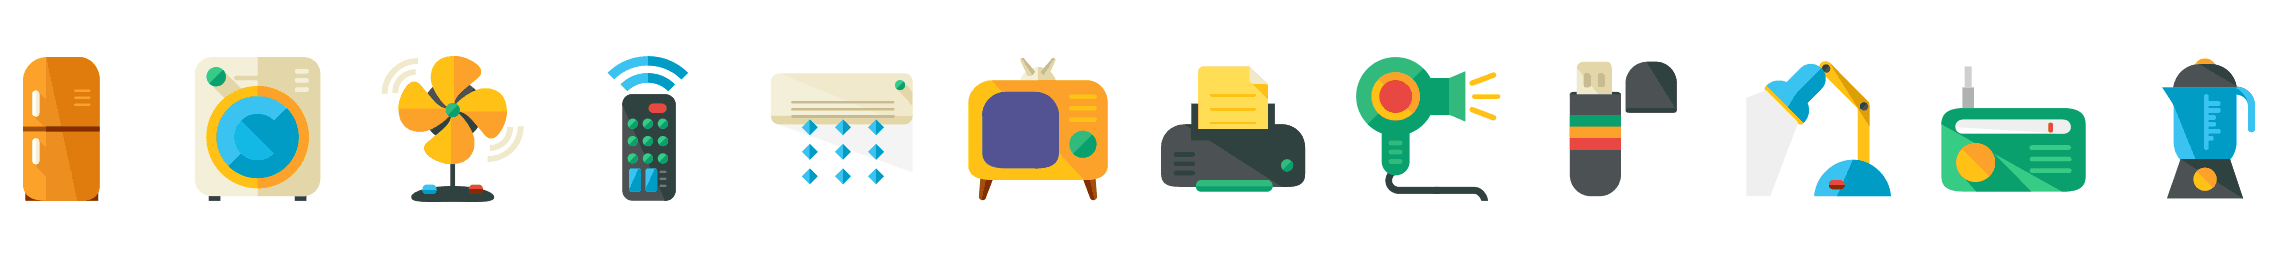 Home-Appliances-flat-icons